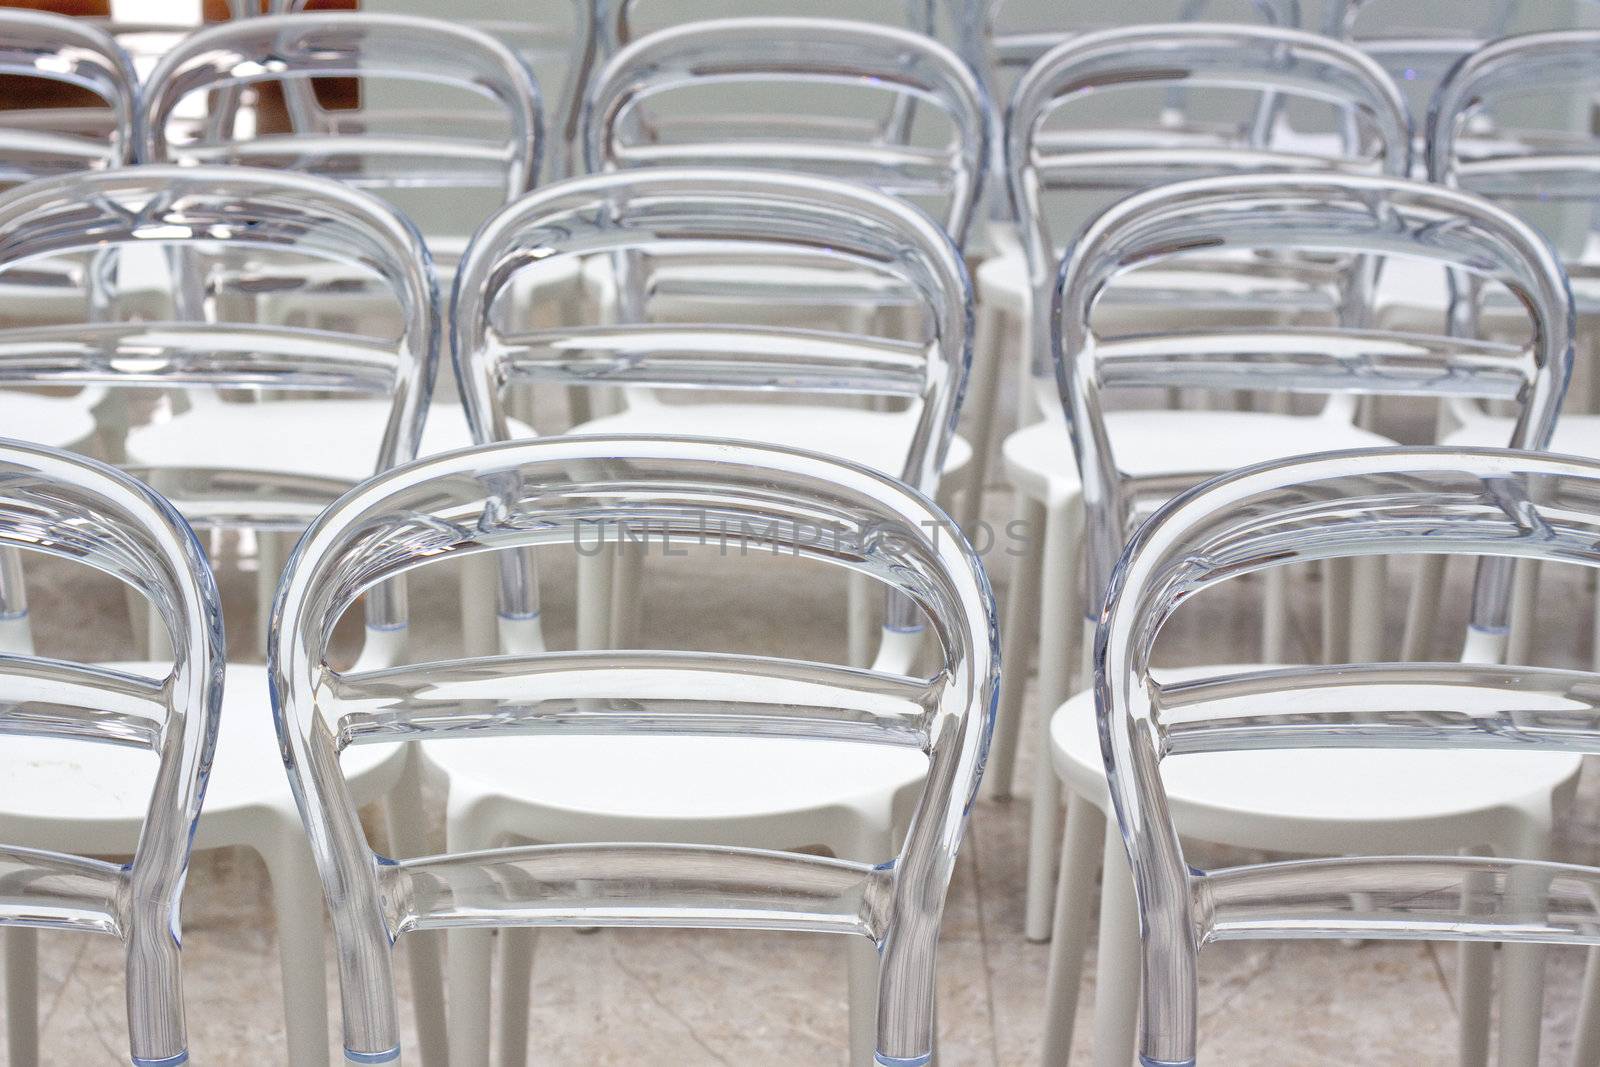 Rows of modern chairs in conference room